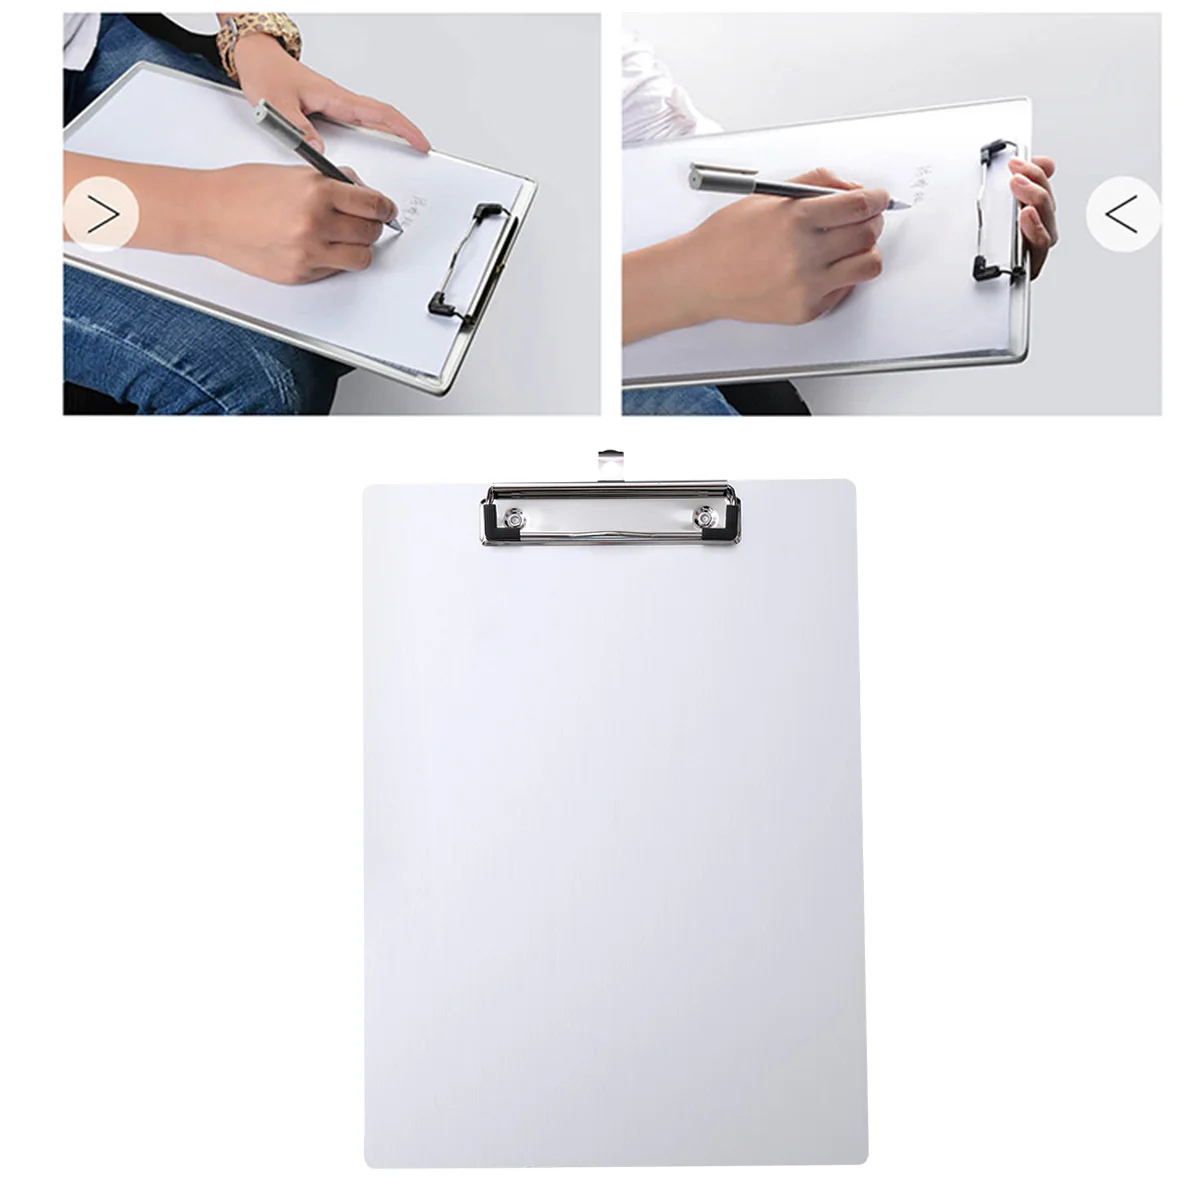 

A4 Aluminum Alloy Clipboards Portable Memo Paper Clipboards with Low Profile Clip for Classrooms, Offices, Restaurants, Offices